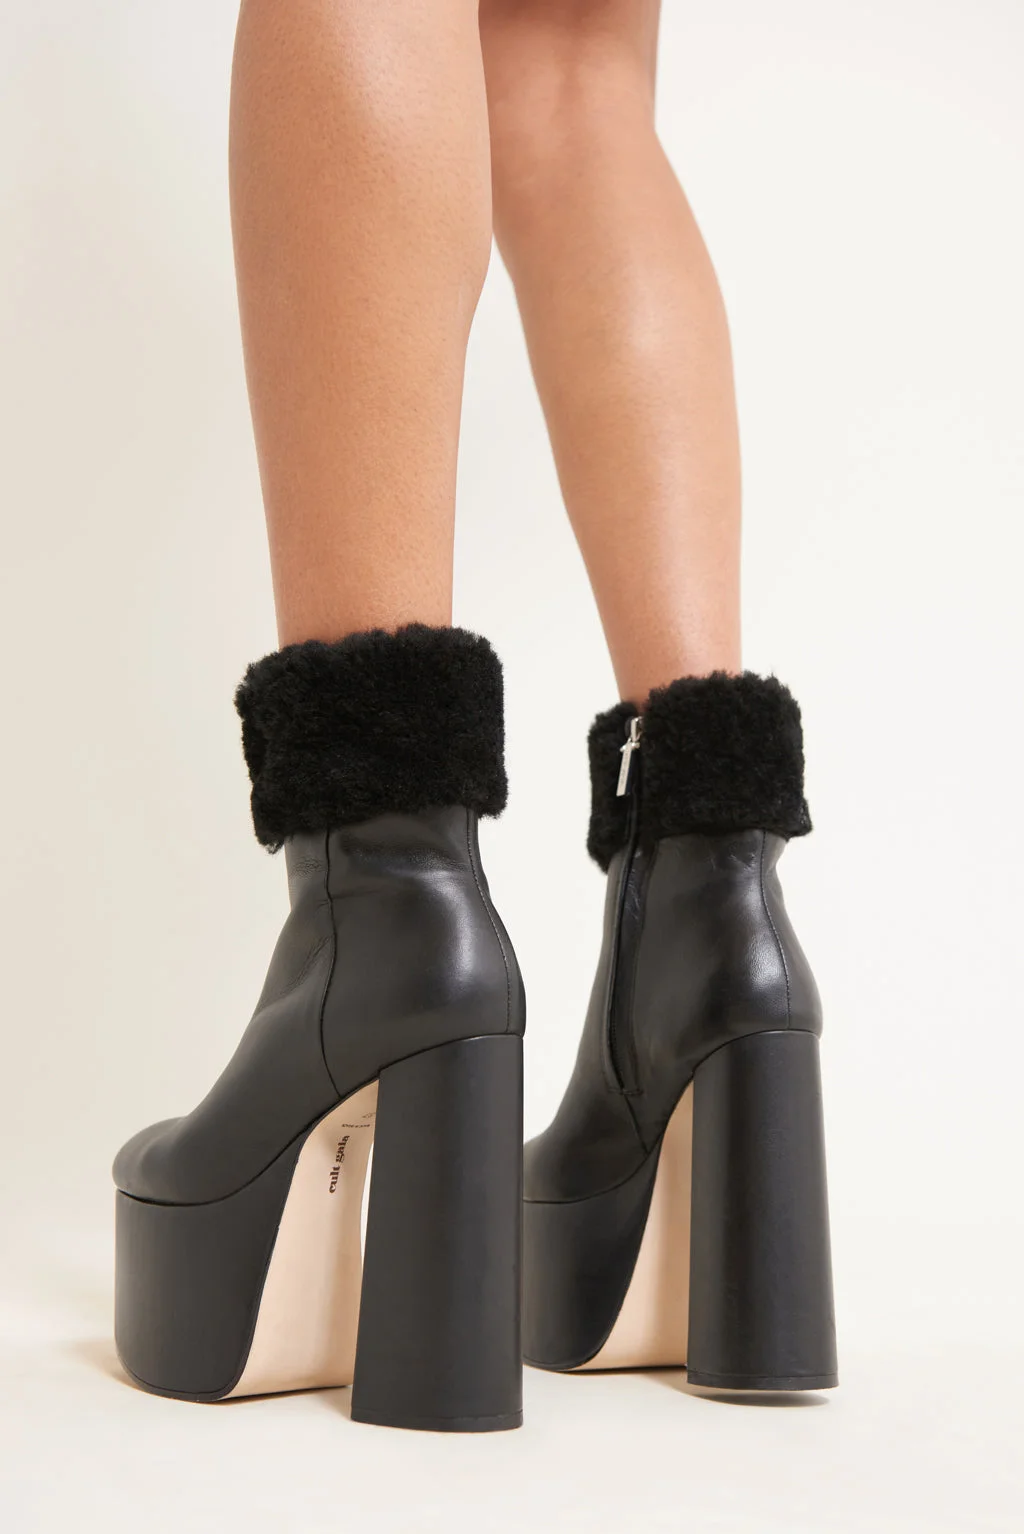 Black  Furry Boots With Platform Block Heel Ankle Boots Nicepairs